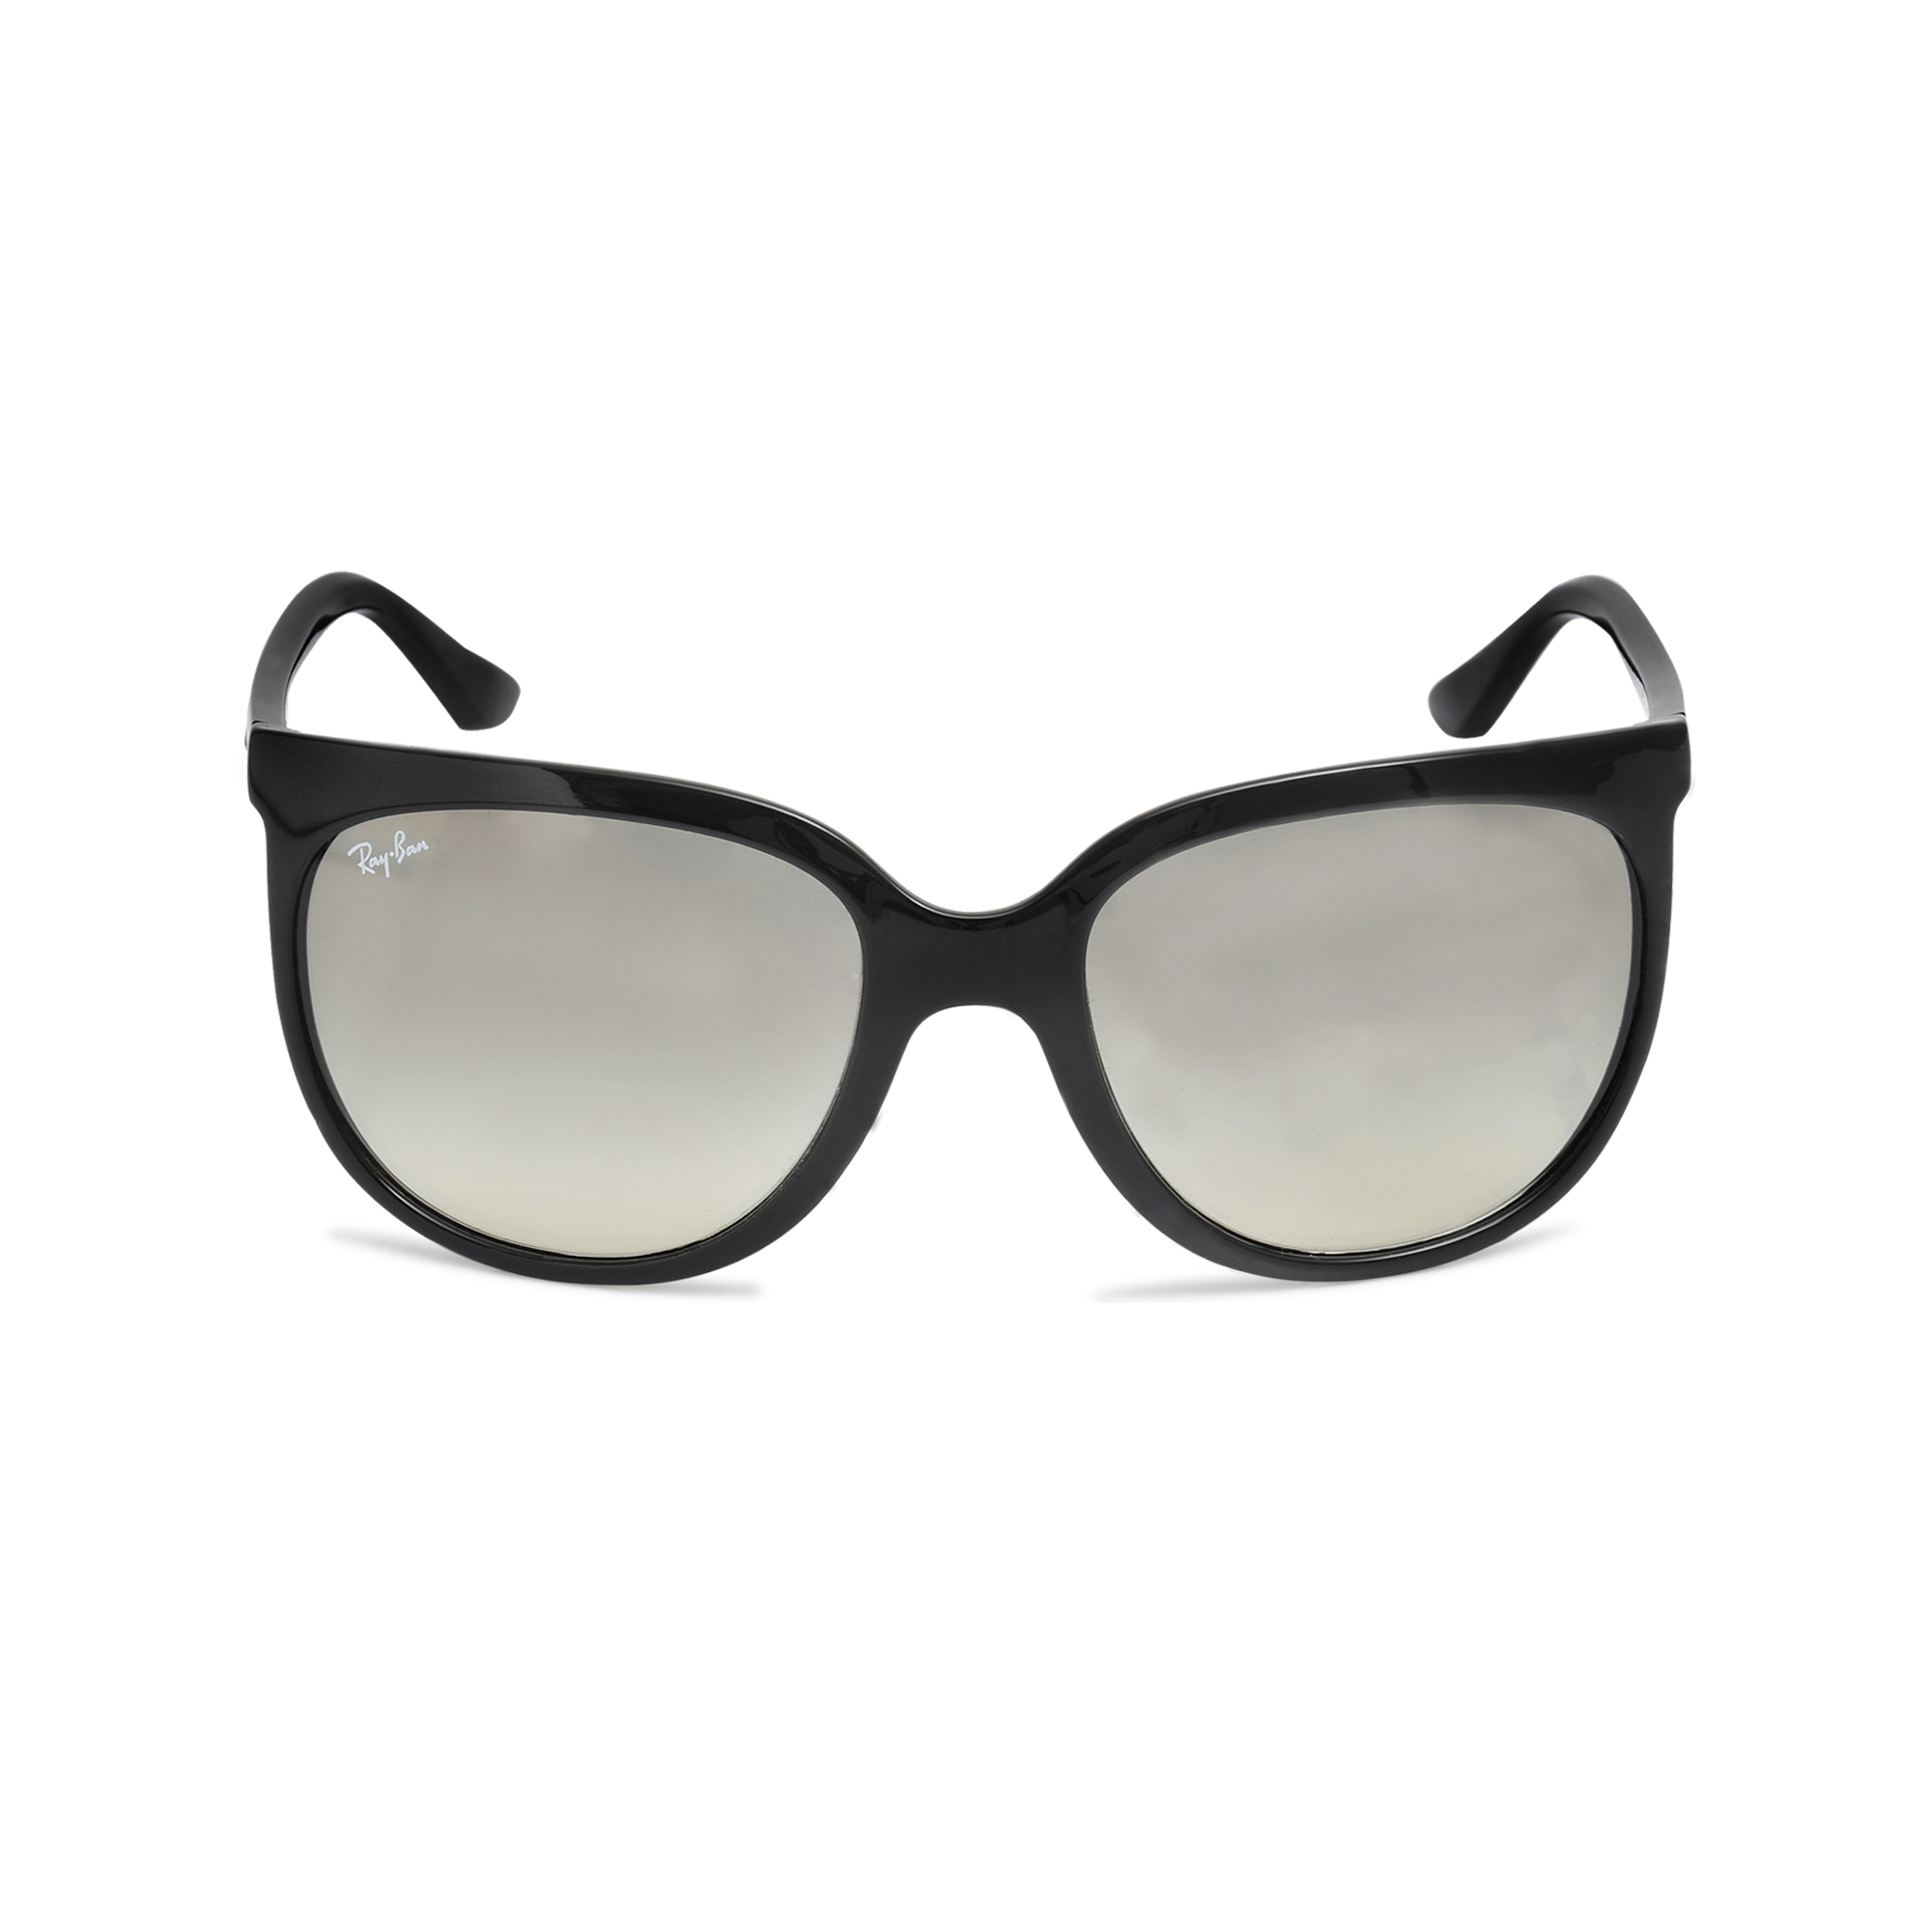 RayBan 4126 Cats 1000 Sunglasses in Black Lyst